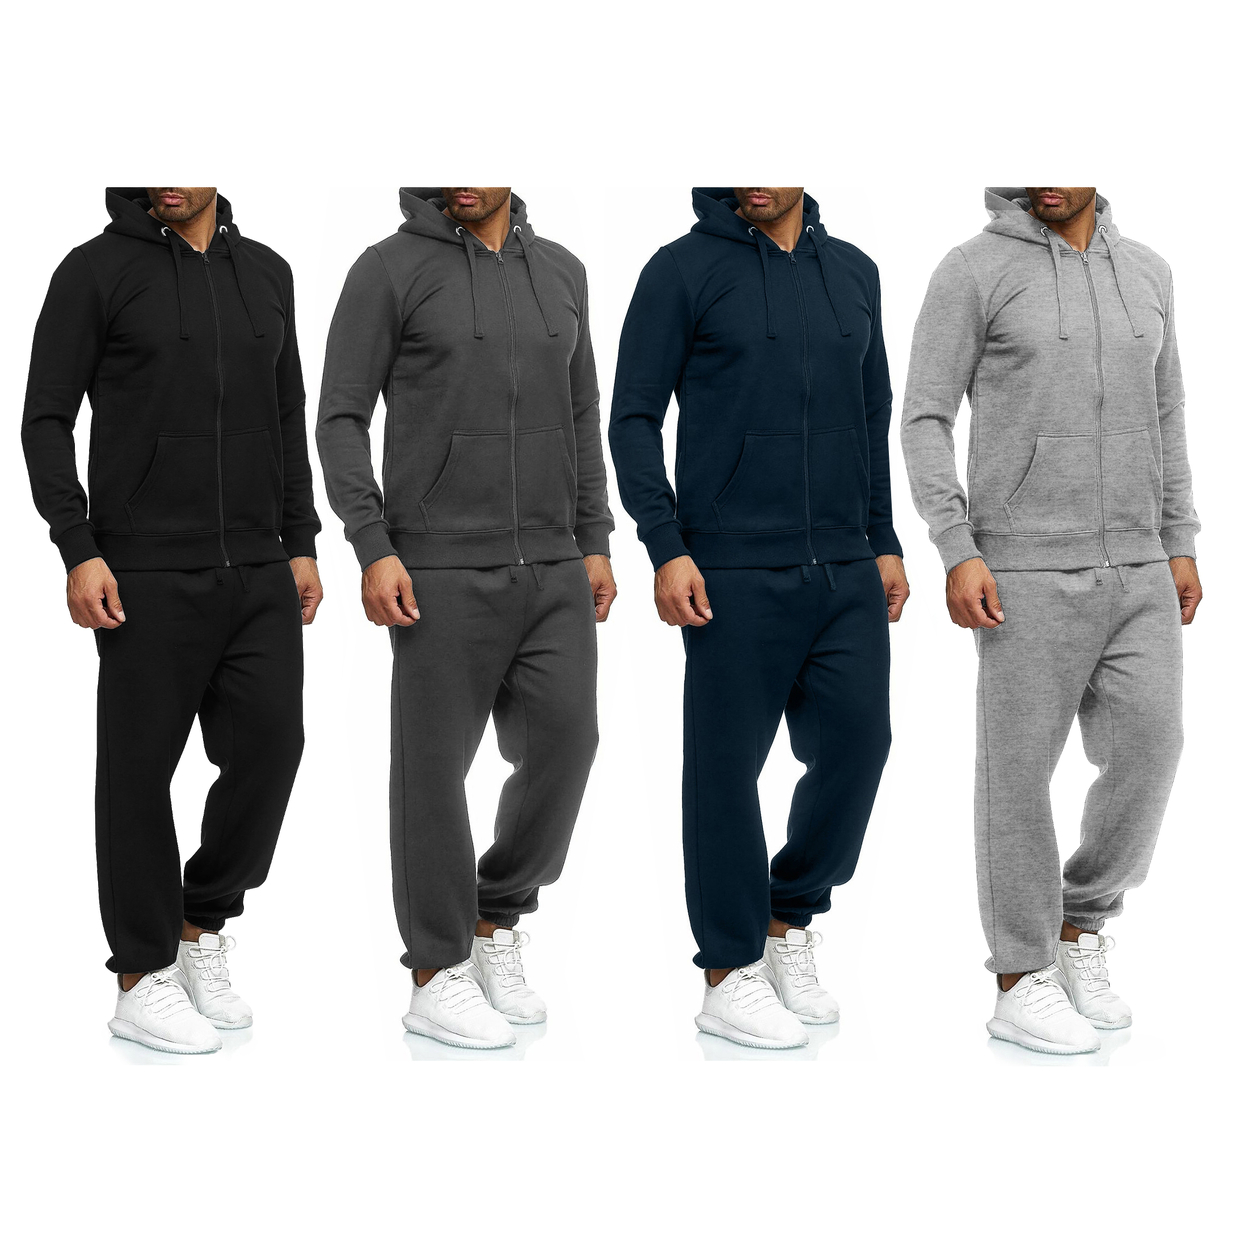 Multi-Pack: Men's Casual Big & Tall Athletic Active Winter Warm Fleece Lined Full Zip Tracksuit Jogger Set - Grey, 2-pack, Xx-large